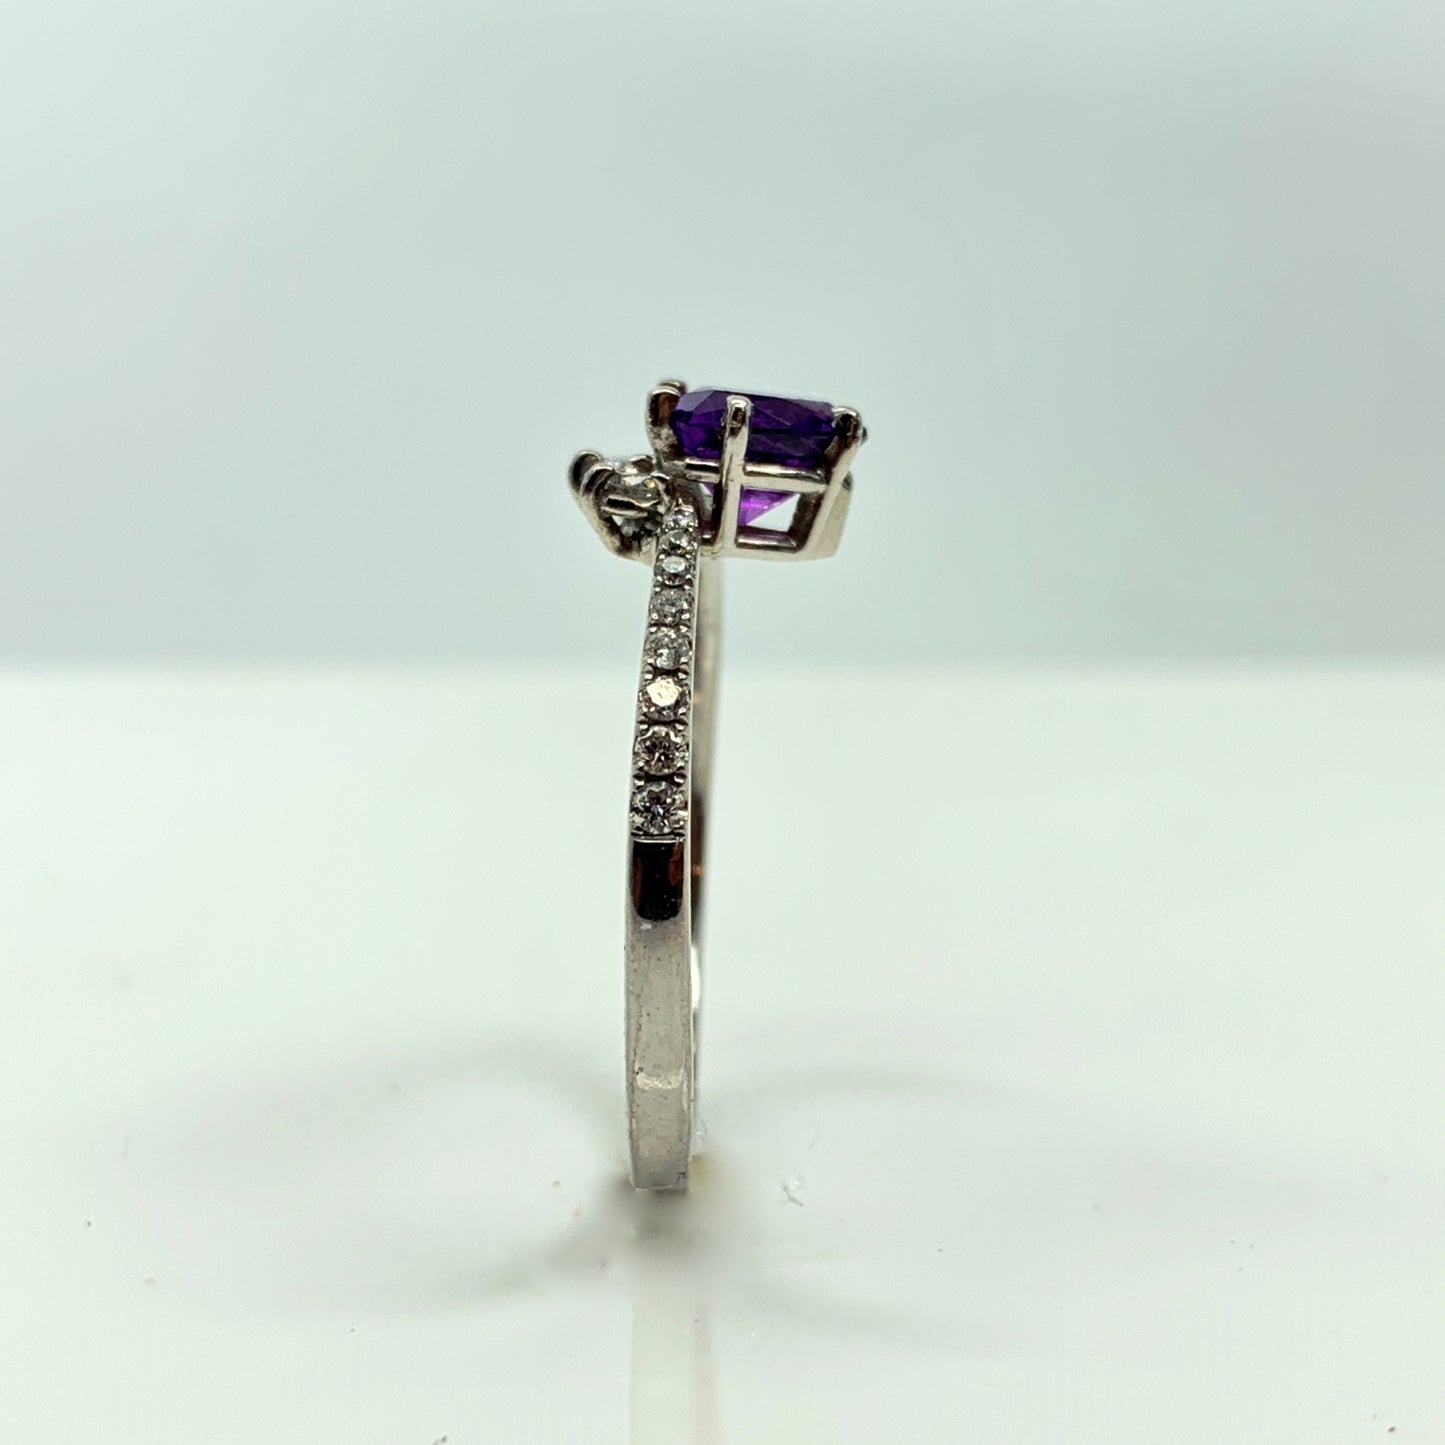 Amethyst and Diamond 14k White Gold Ring